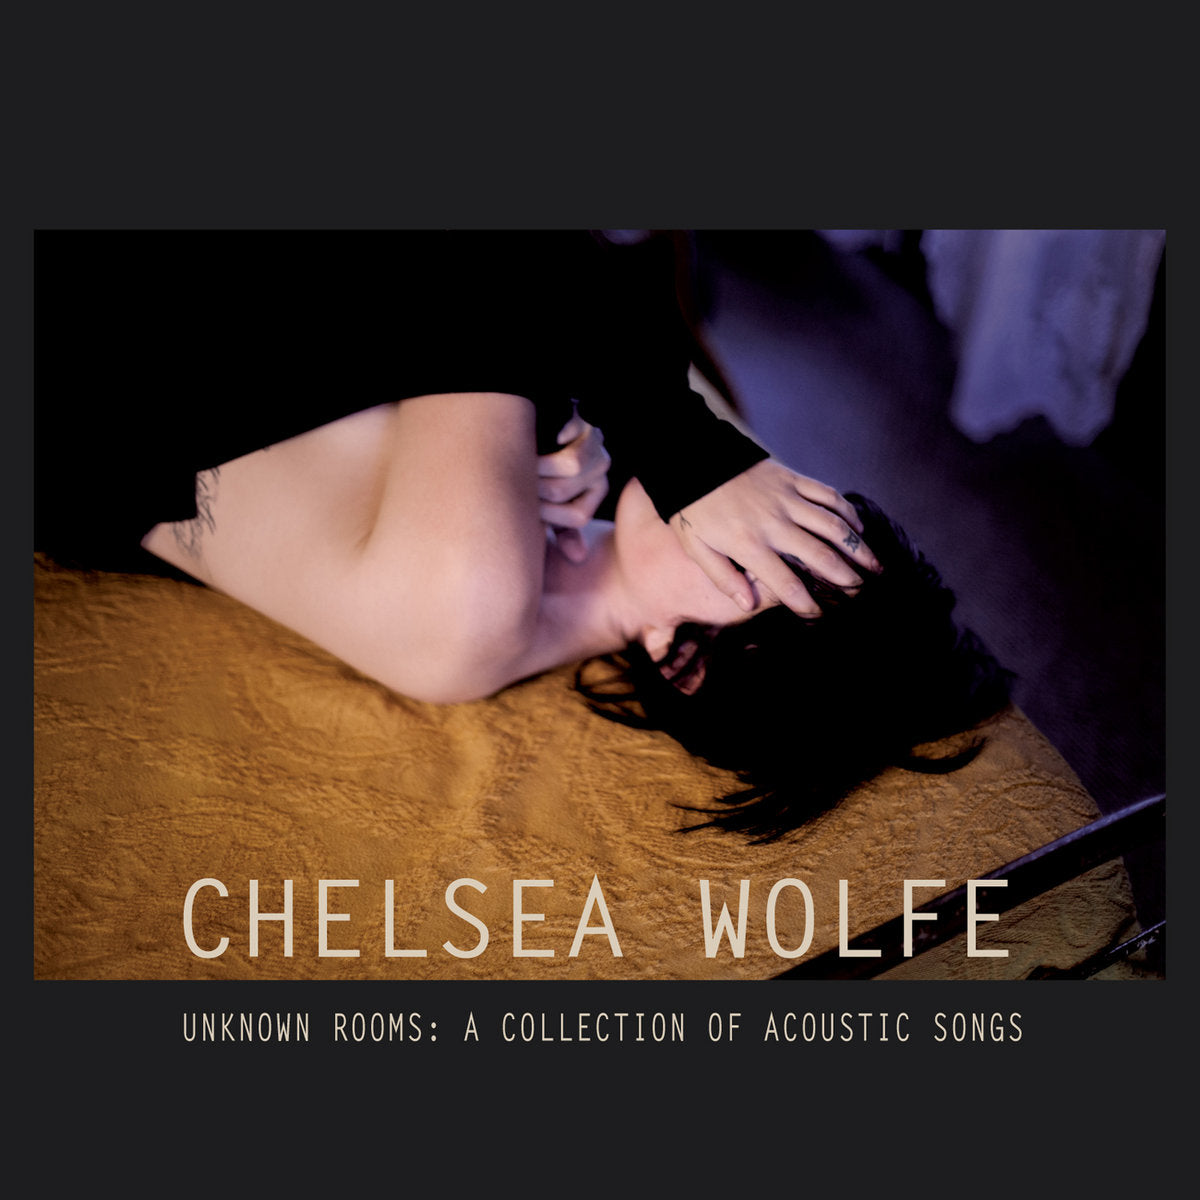 CHELSEA WOLFE "Unknown Rooms: A Collection Of Acoustic Songs" CD